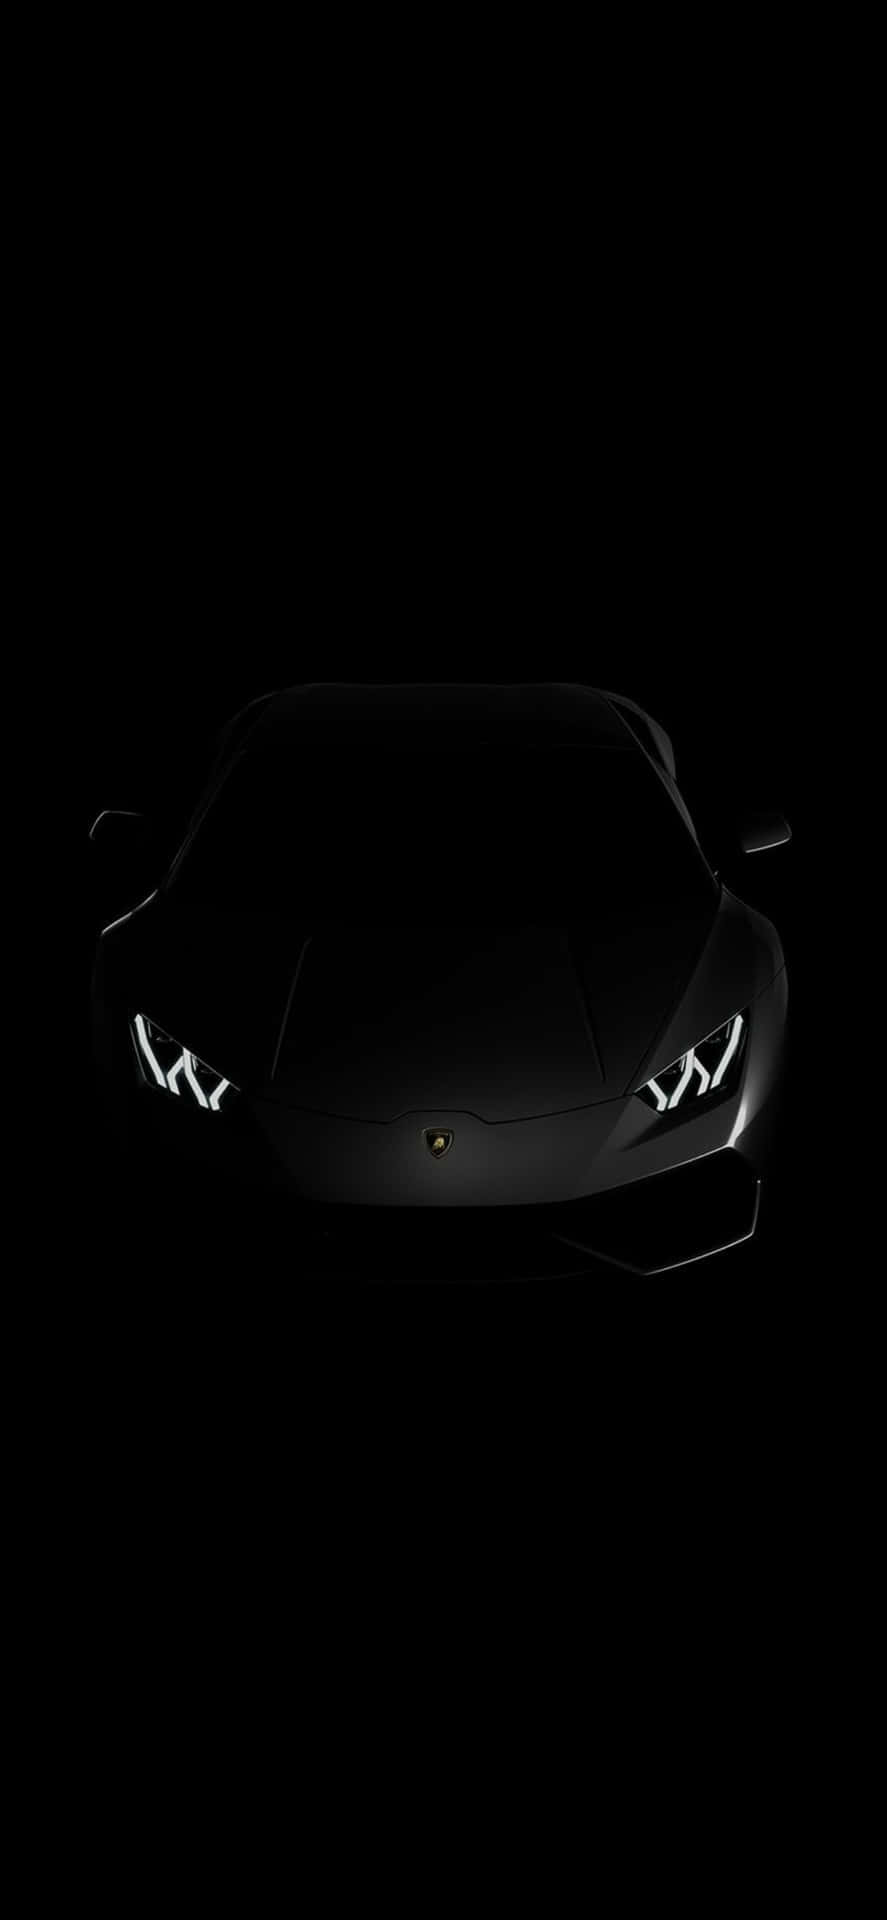 Unlock the luxury and power of the Lamborghini with the iPhone X.